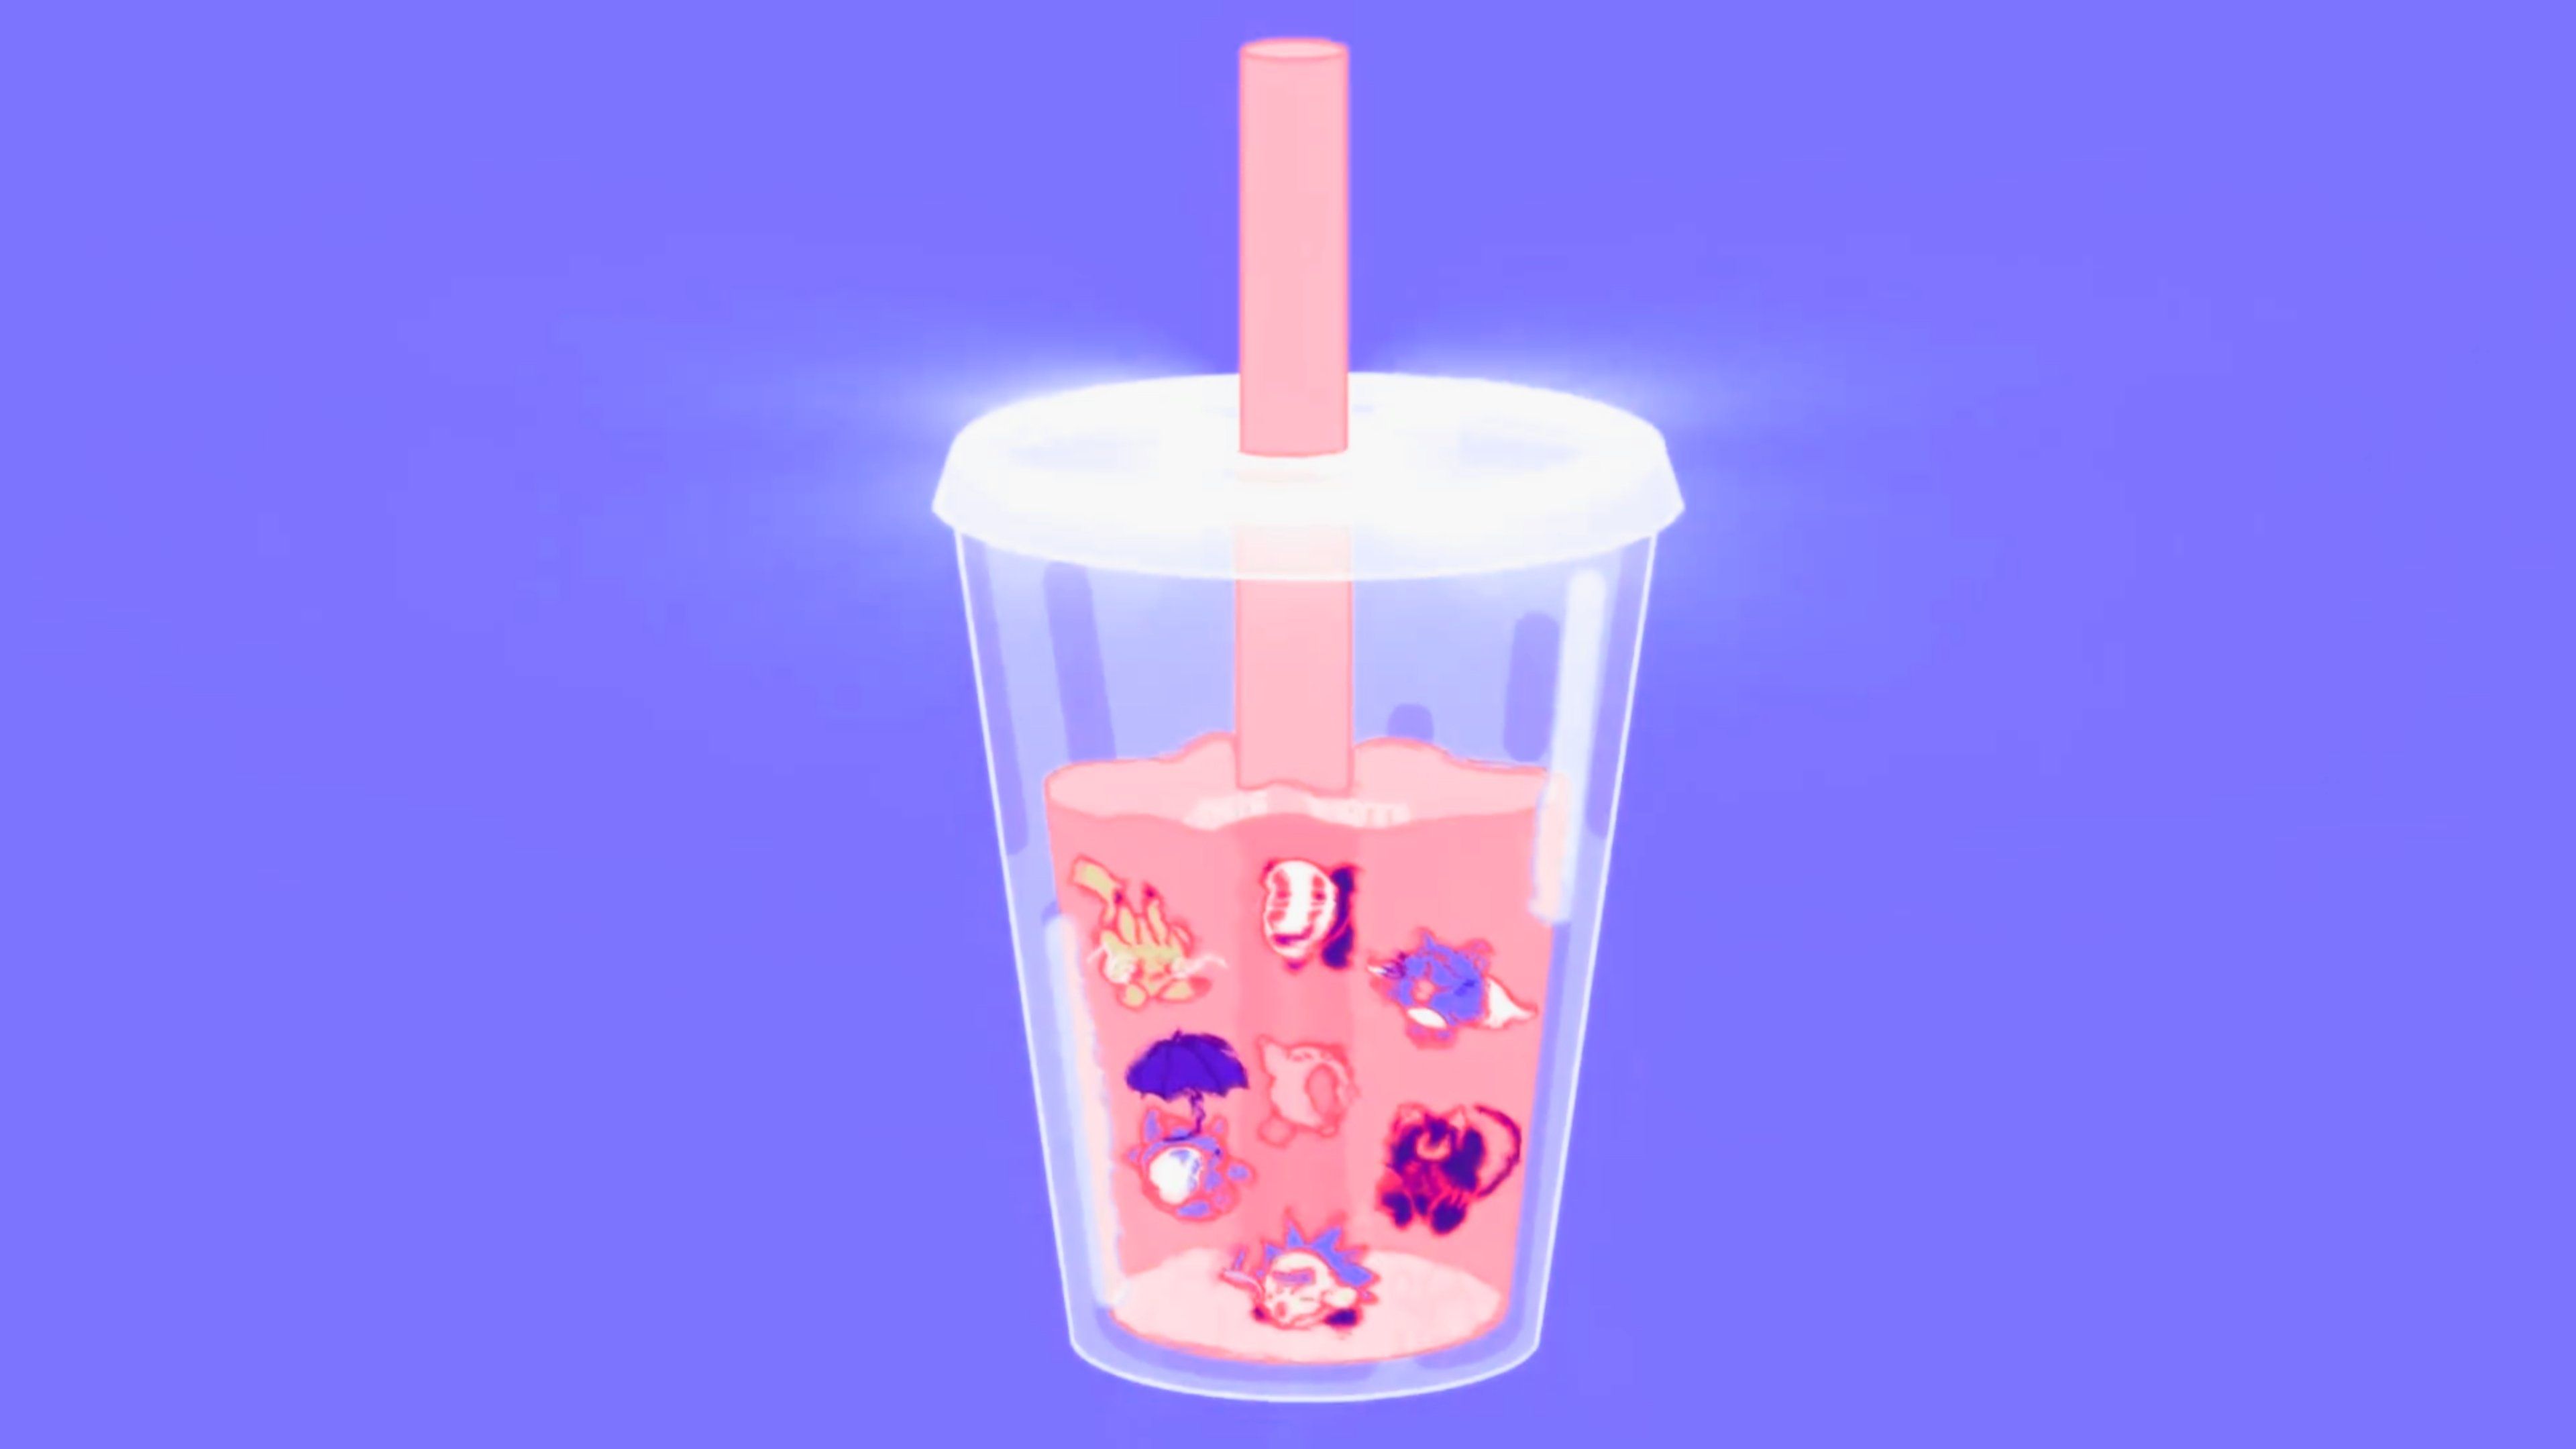 A clear plastic cup filled with pink liquid and decorated with pink and purple boba pearls. - Boba